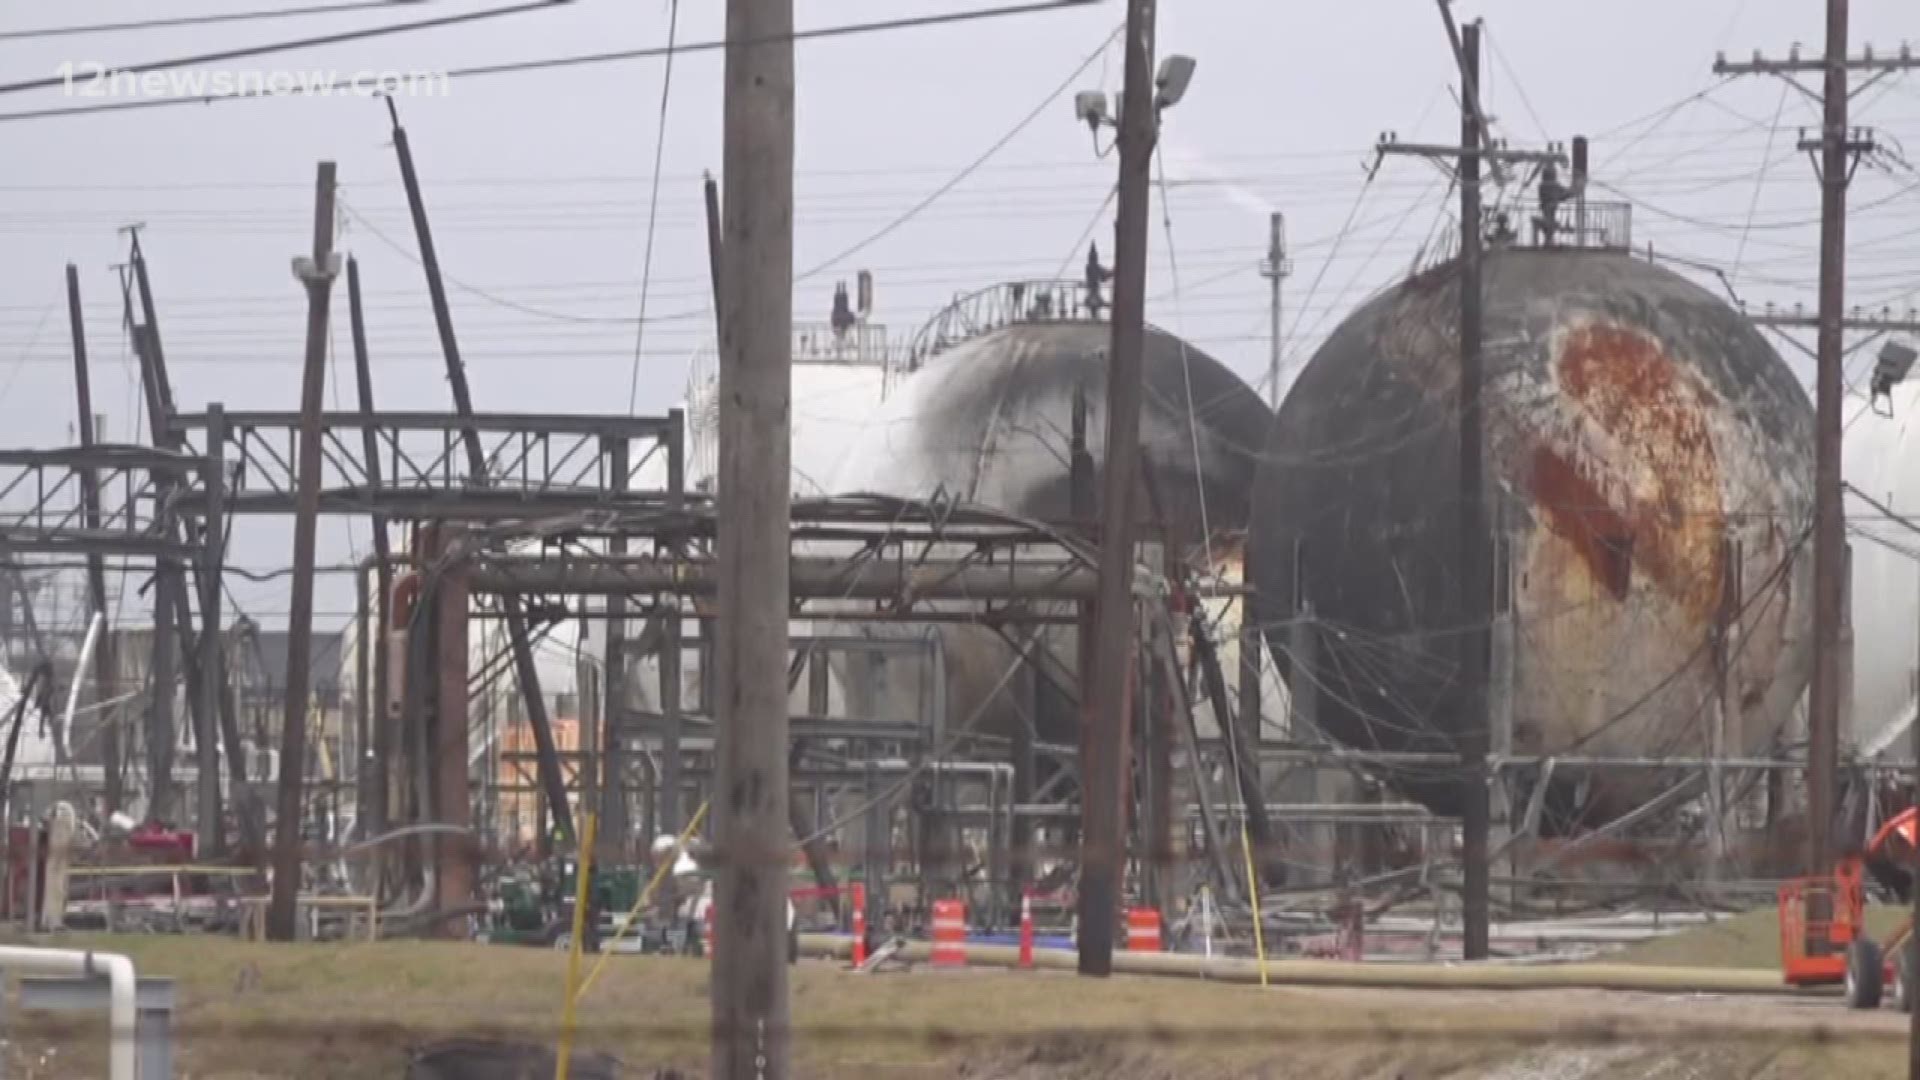 The company made changes several days ago after two major explosions rocked Port Neches in November